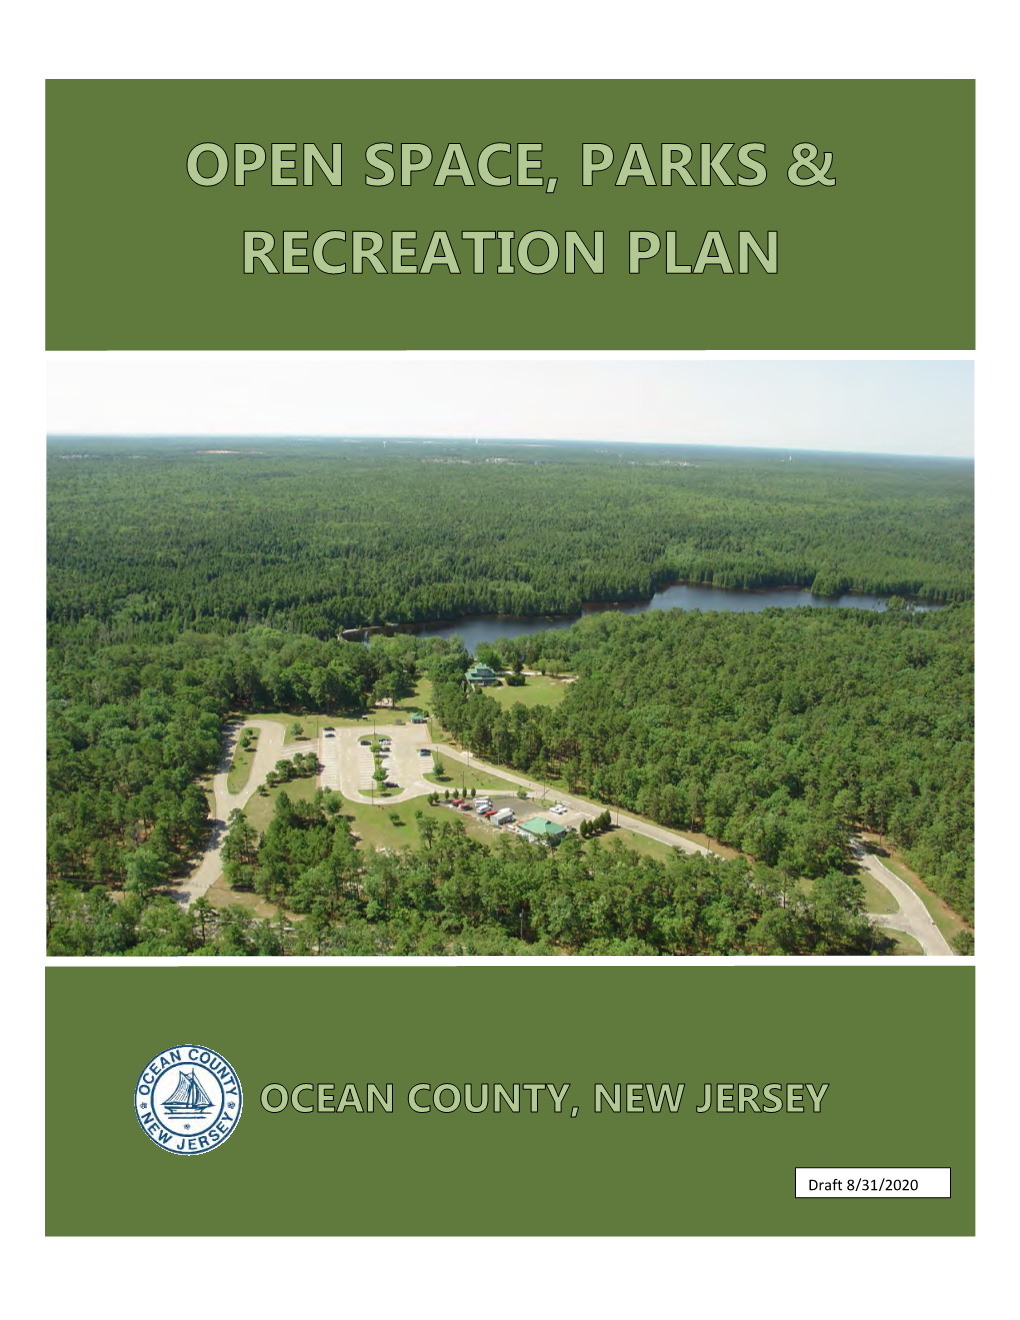 Ocean County Open Space, Parks and Recreation Plan